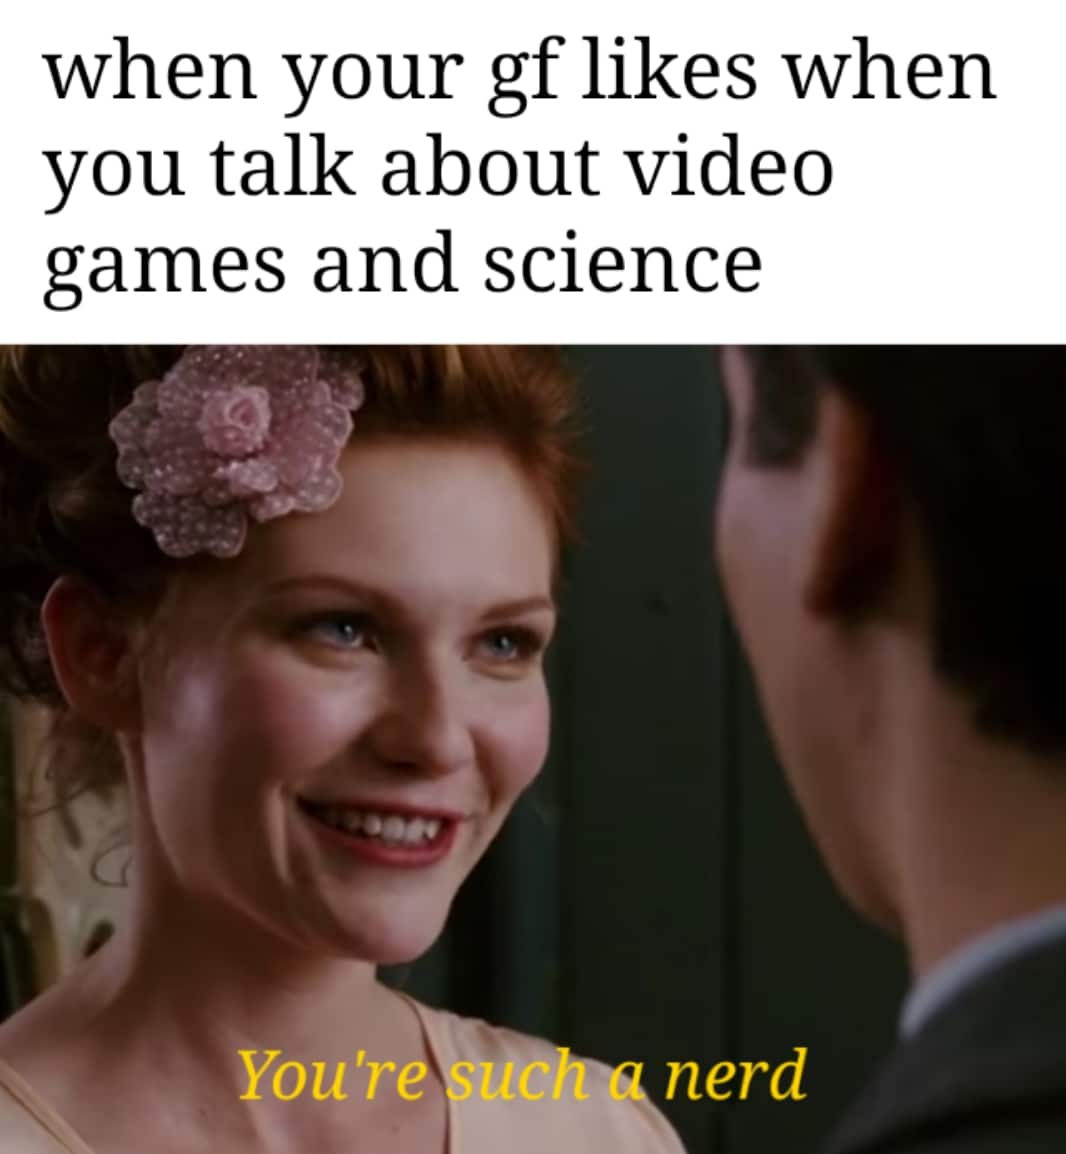 Wholesome memes,  Wholesome Memes Wholesome memes,  text: when your gf likes when you talk about video games and science You're uc nerd 